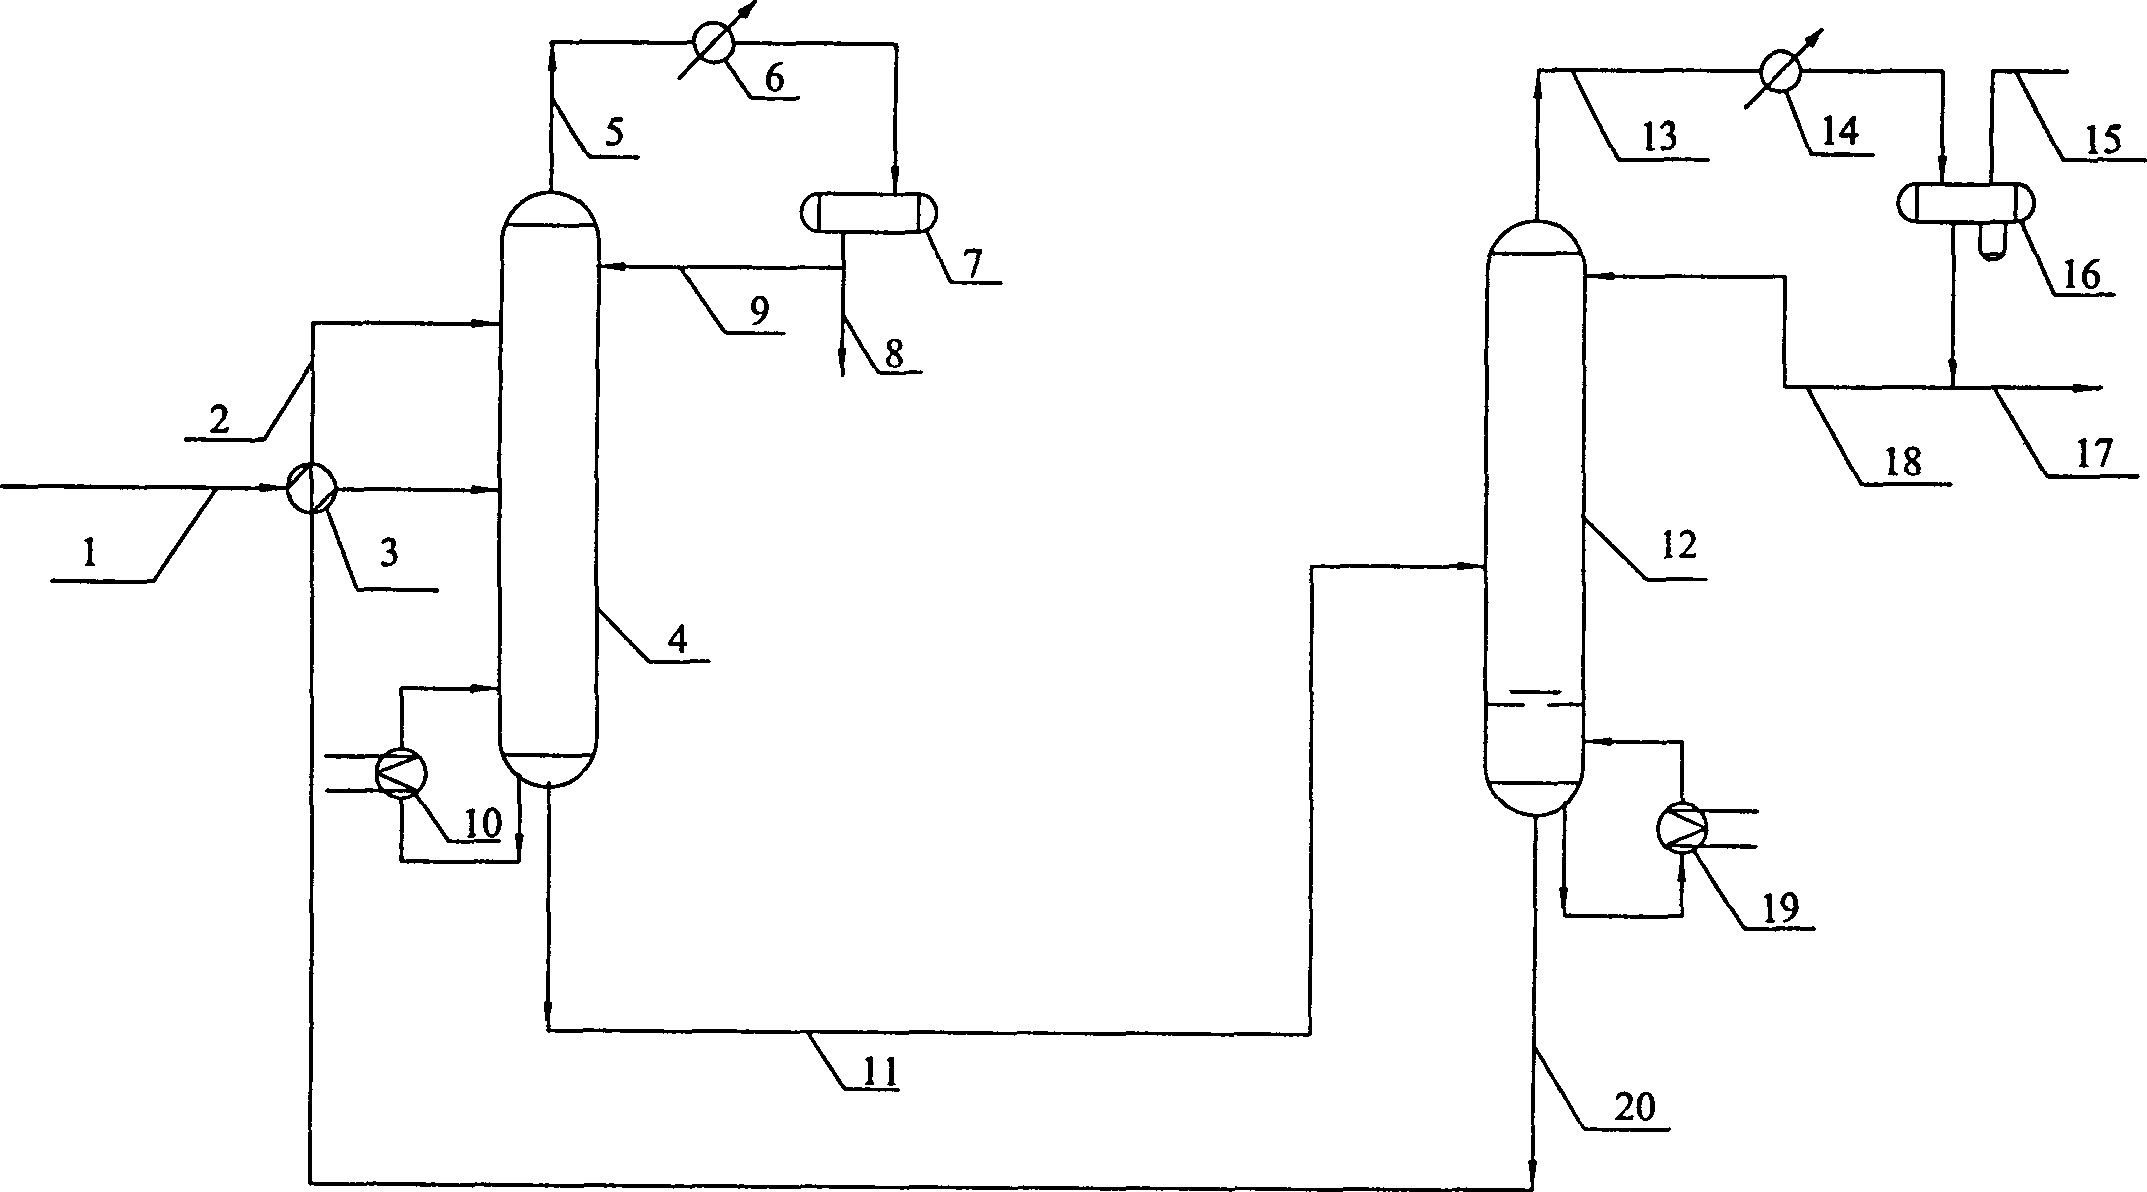 Process for composite solvent for separating arylhydrocarbon by extraction and distillation